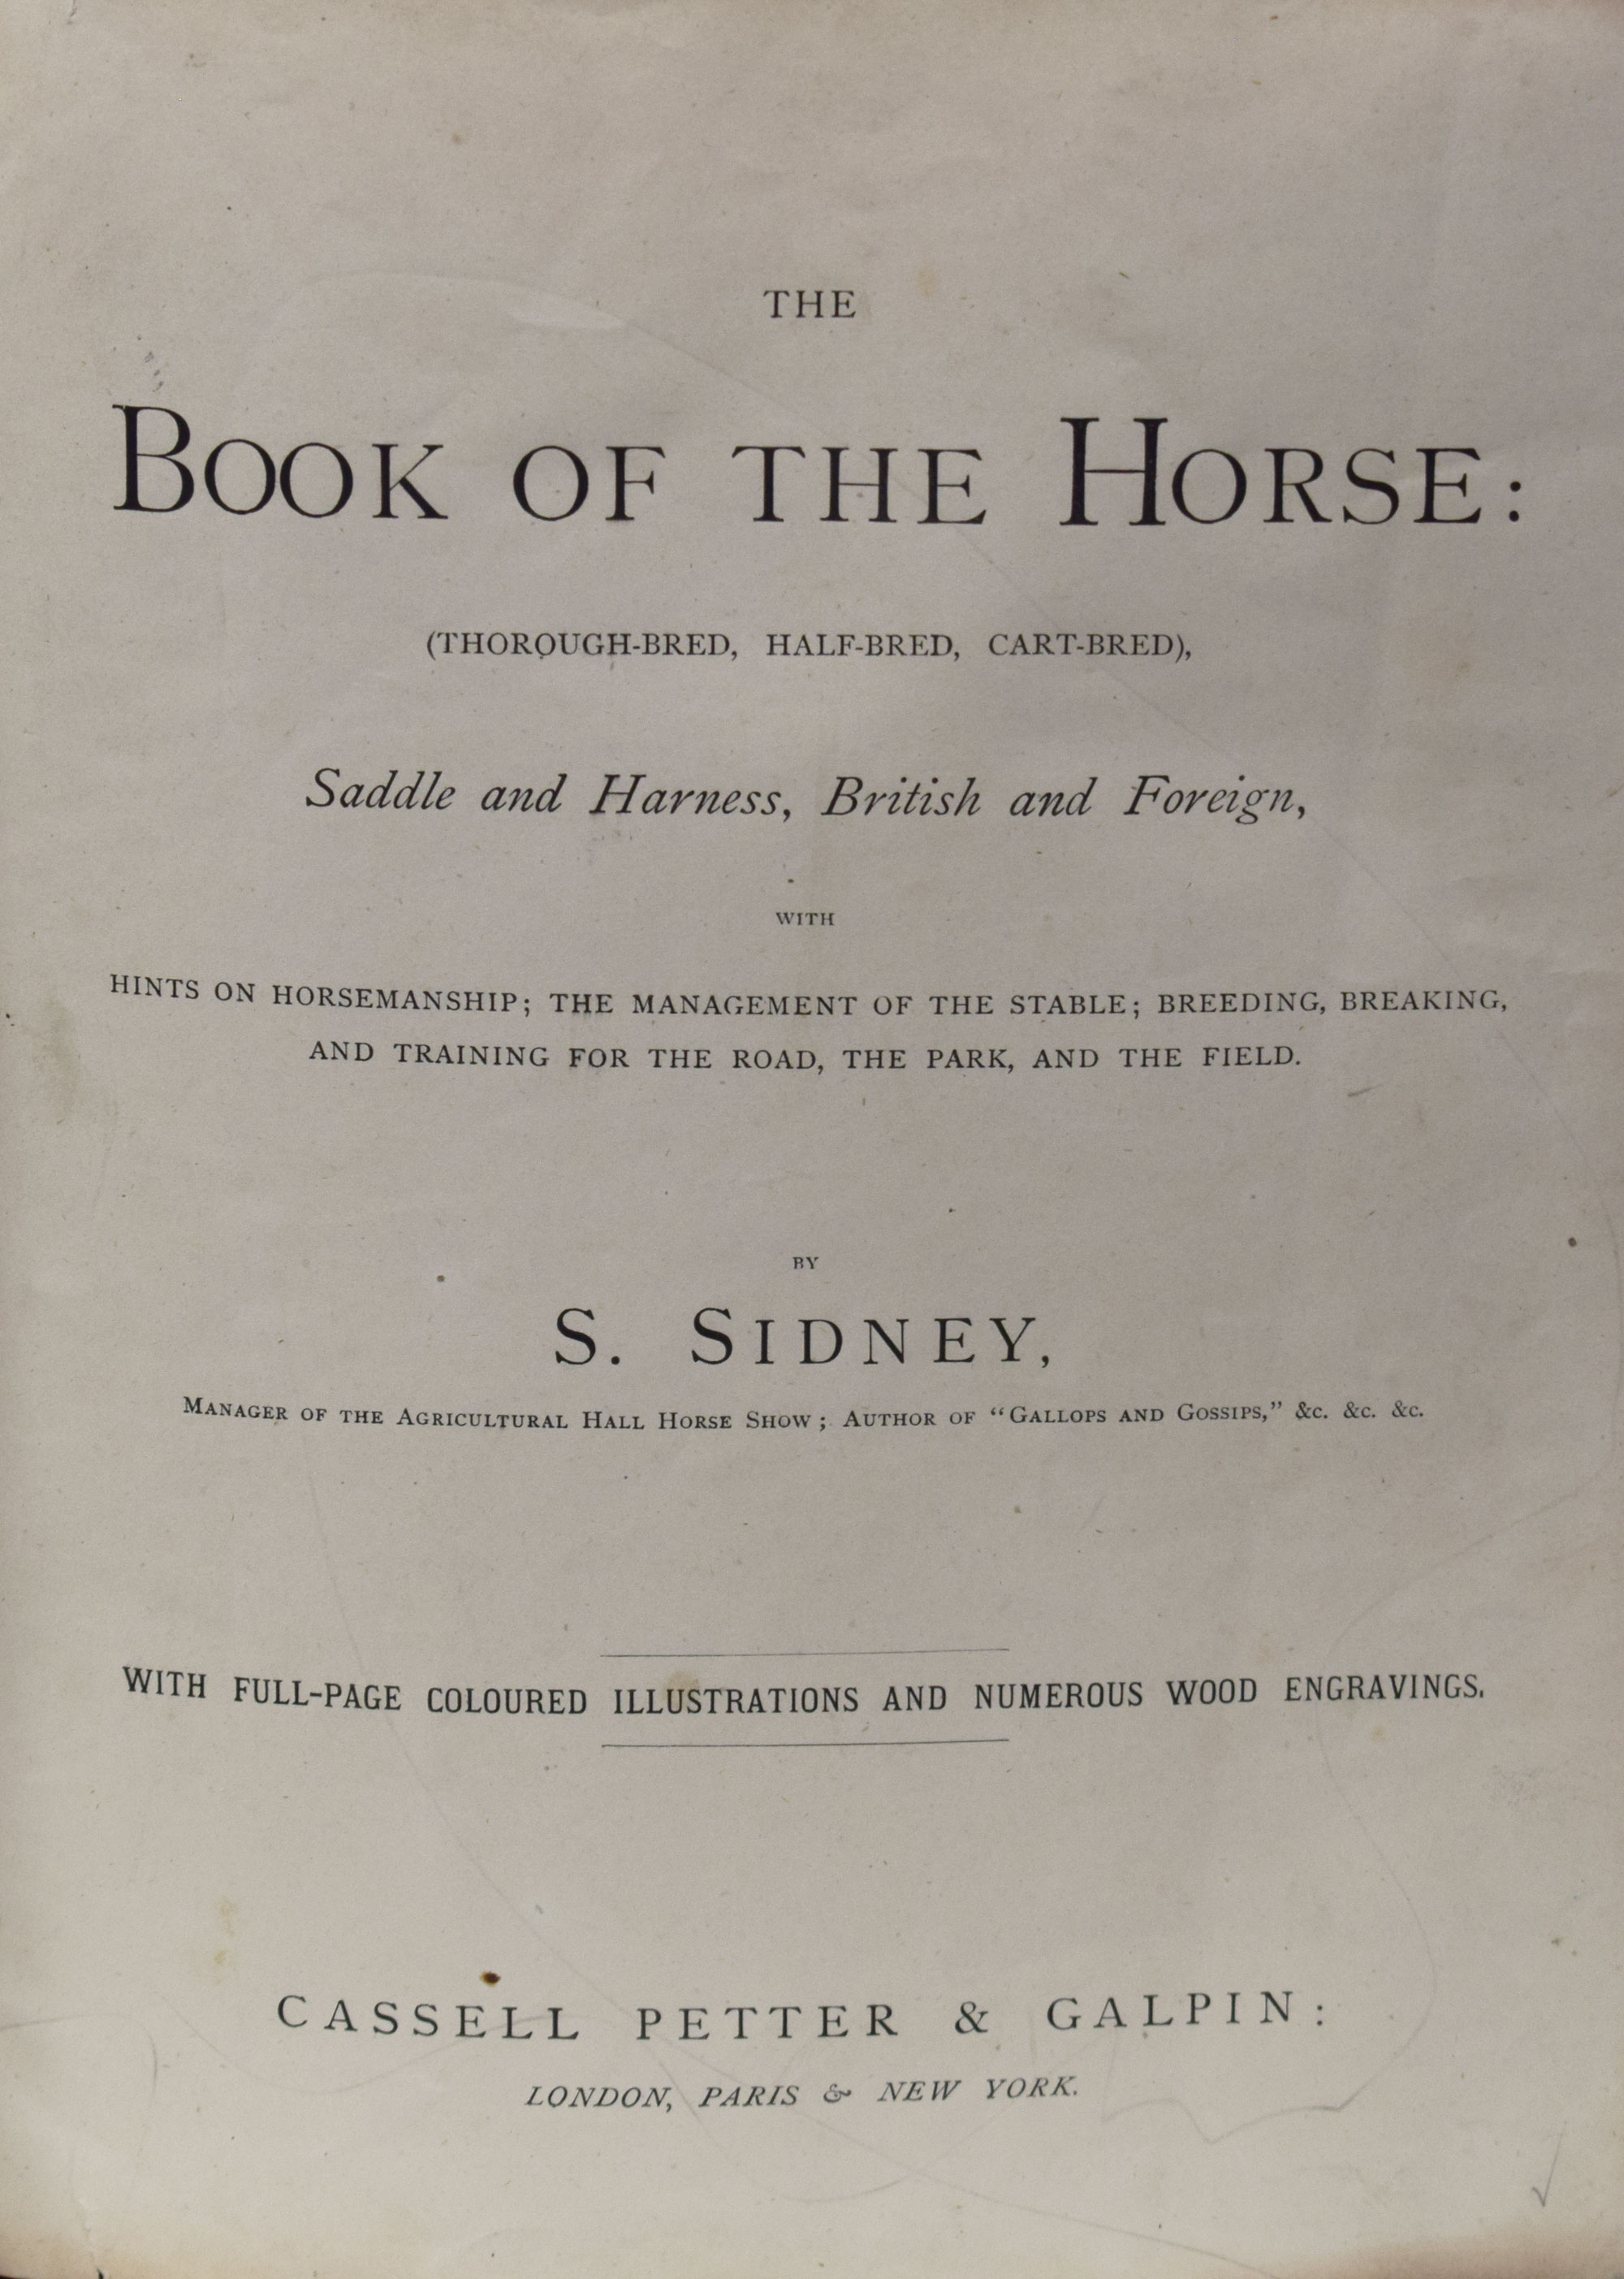 The Book of the Horse. Thorough-Bred, Half-Bred, Cart-Bred. Saddle and Harness, British and Foreign.